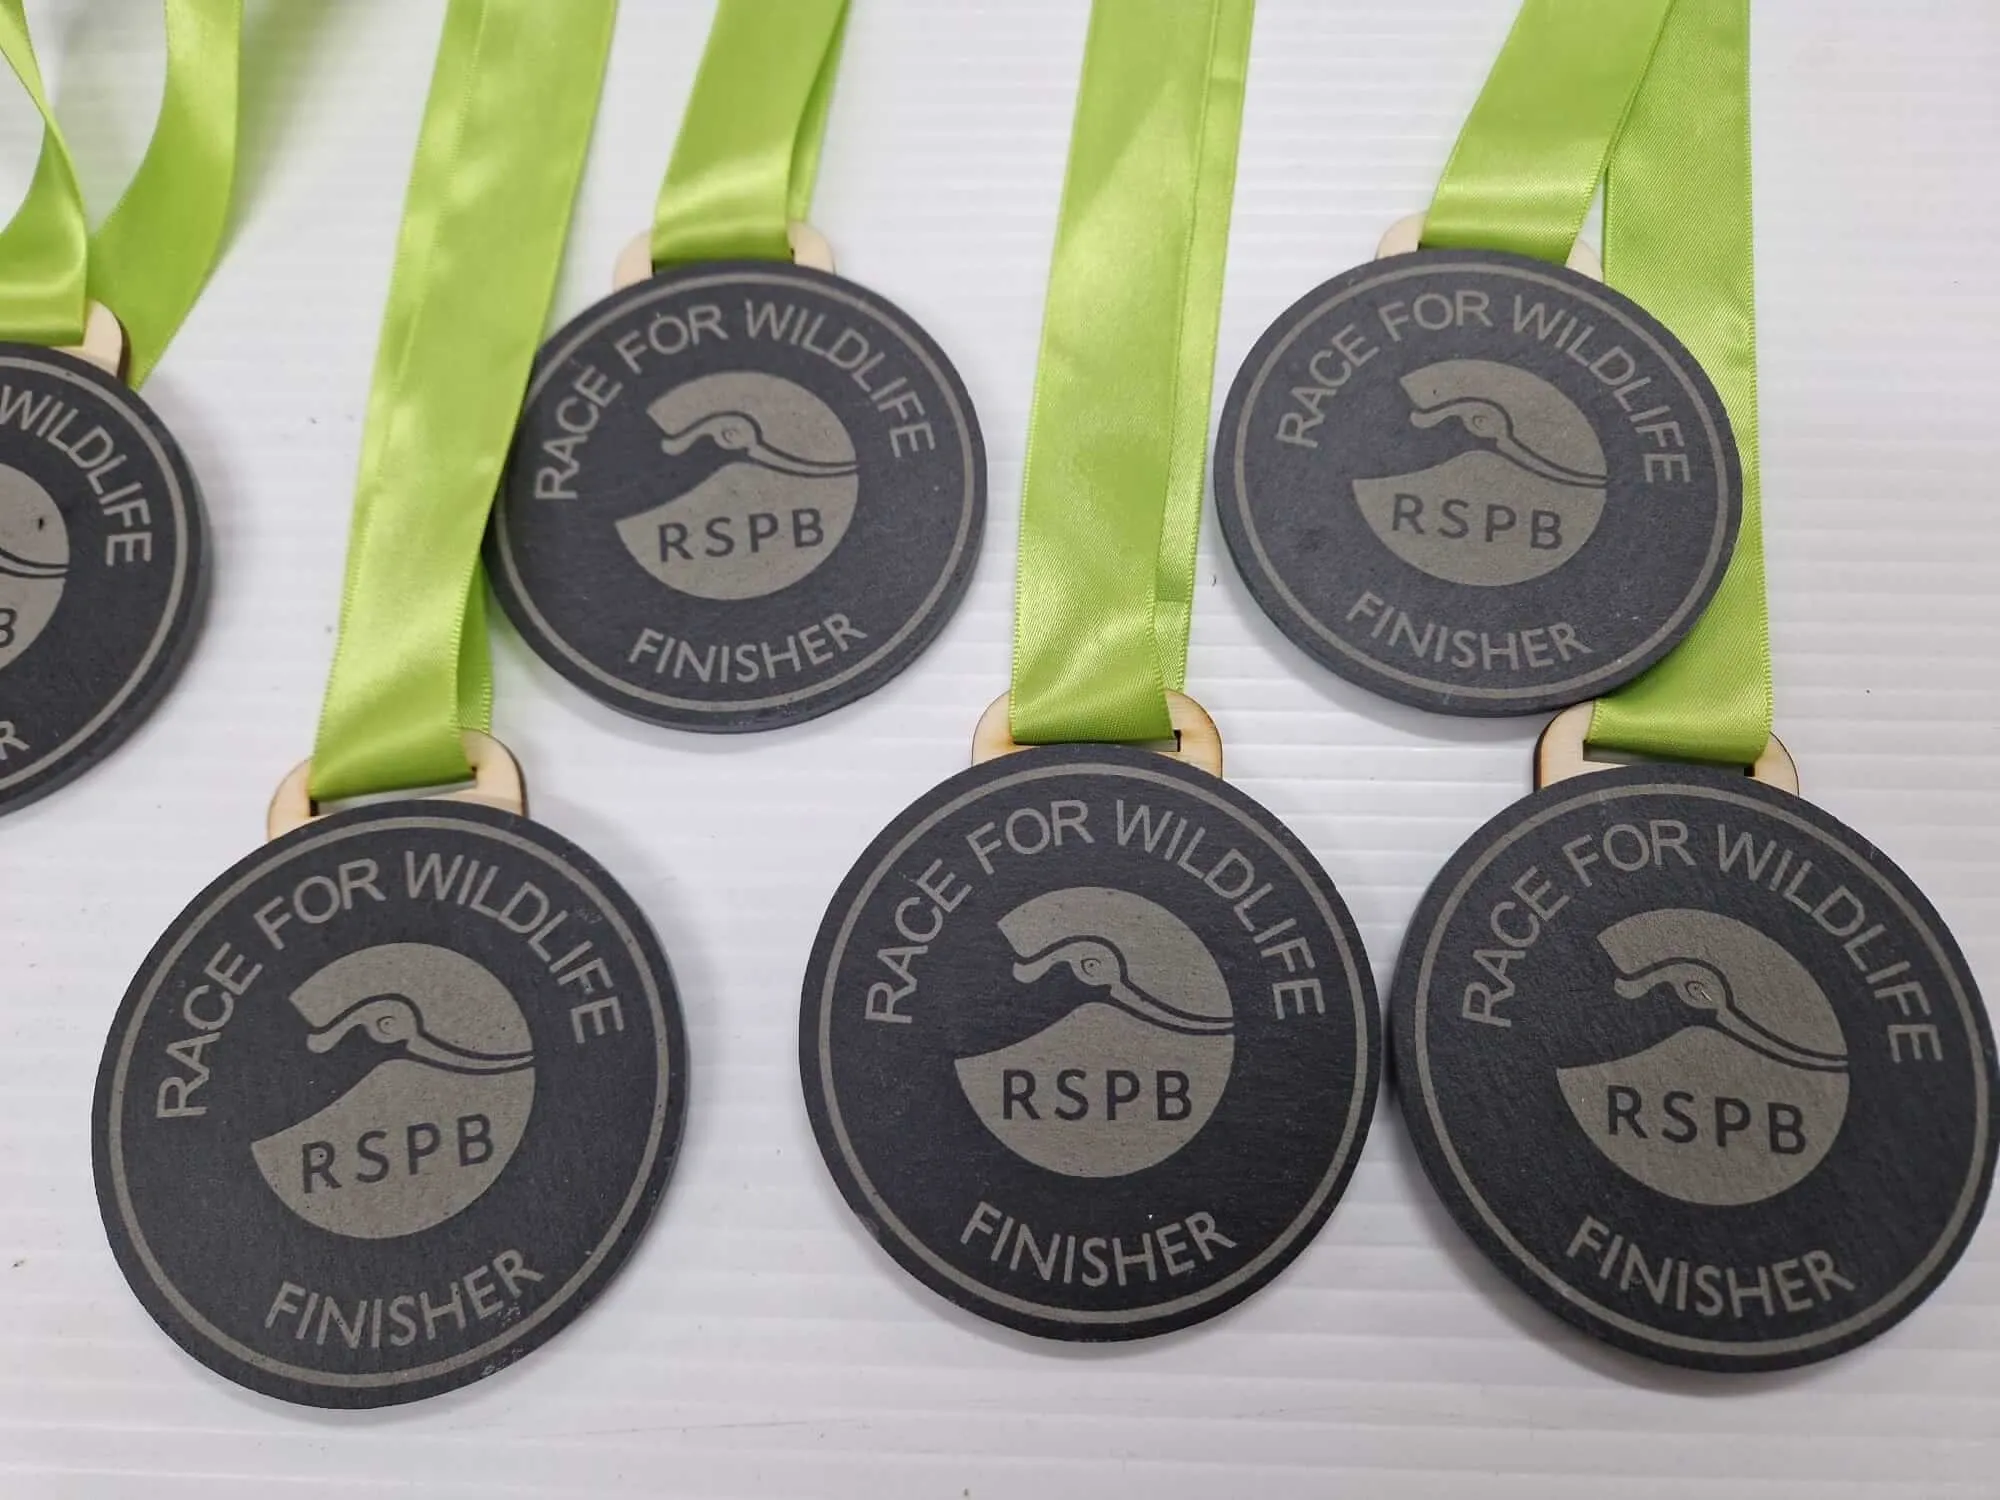 Race for eco-friendly wildlife medals made from slate.